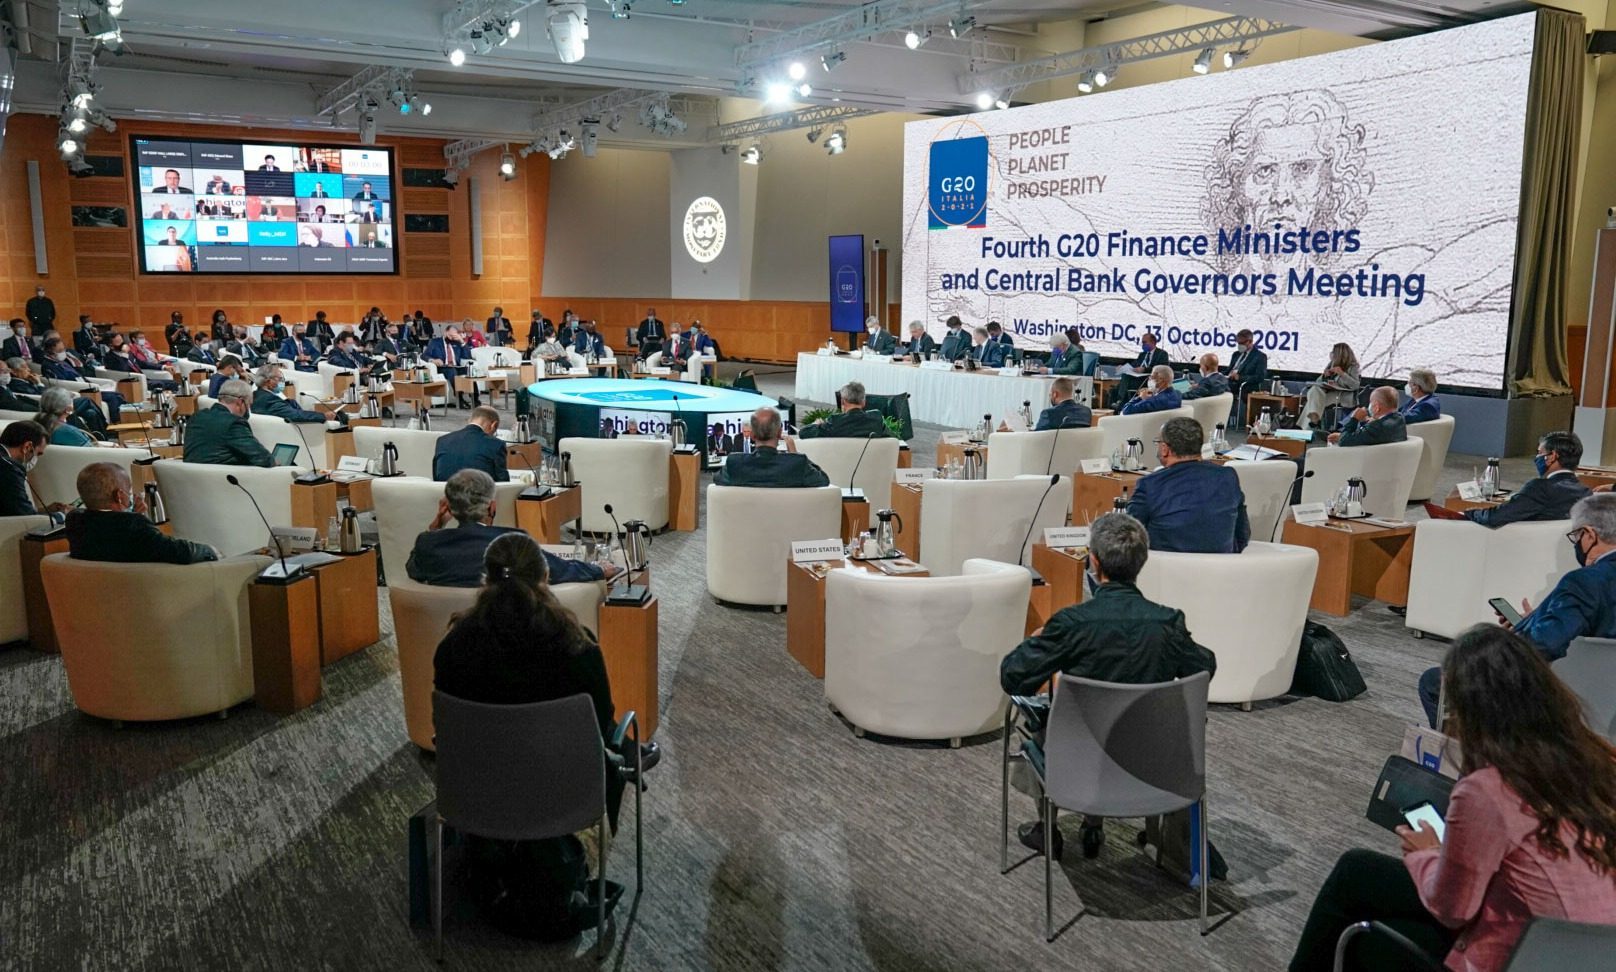 4th G20 Finance Ministers and Central Bank Governors Meeting